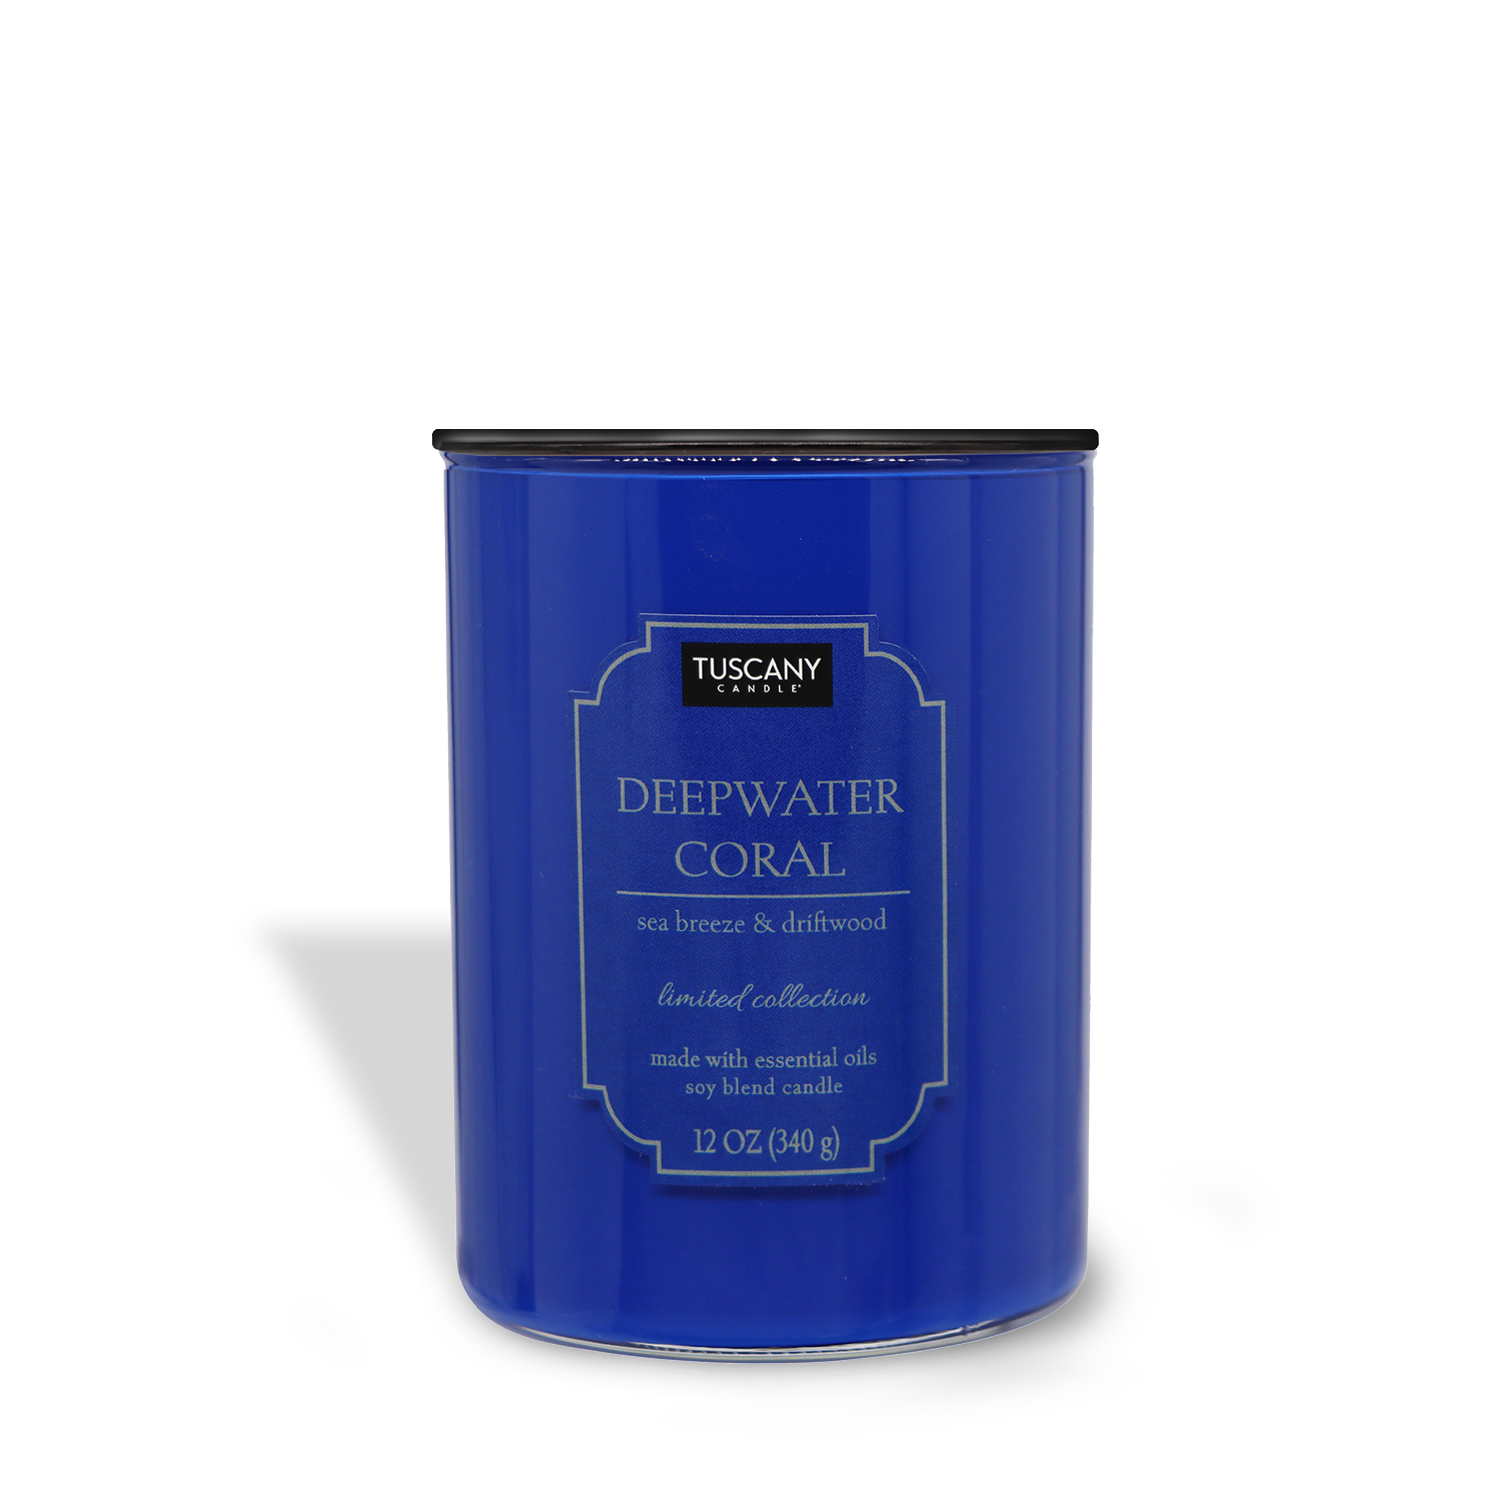 Blue candle in a tin labeled "Deepwater Coral (12 oz) candle from the Colorsplash Collection, sea breeze & driftwood notes, limited collection, soy blend candle" on a white background by Tuscany Candle® EVD.